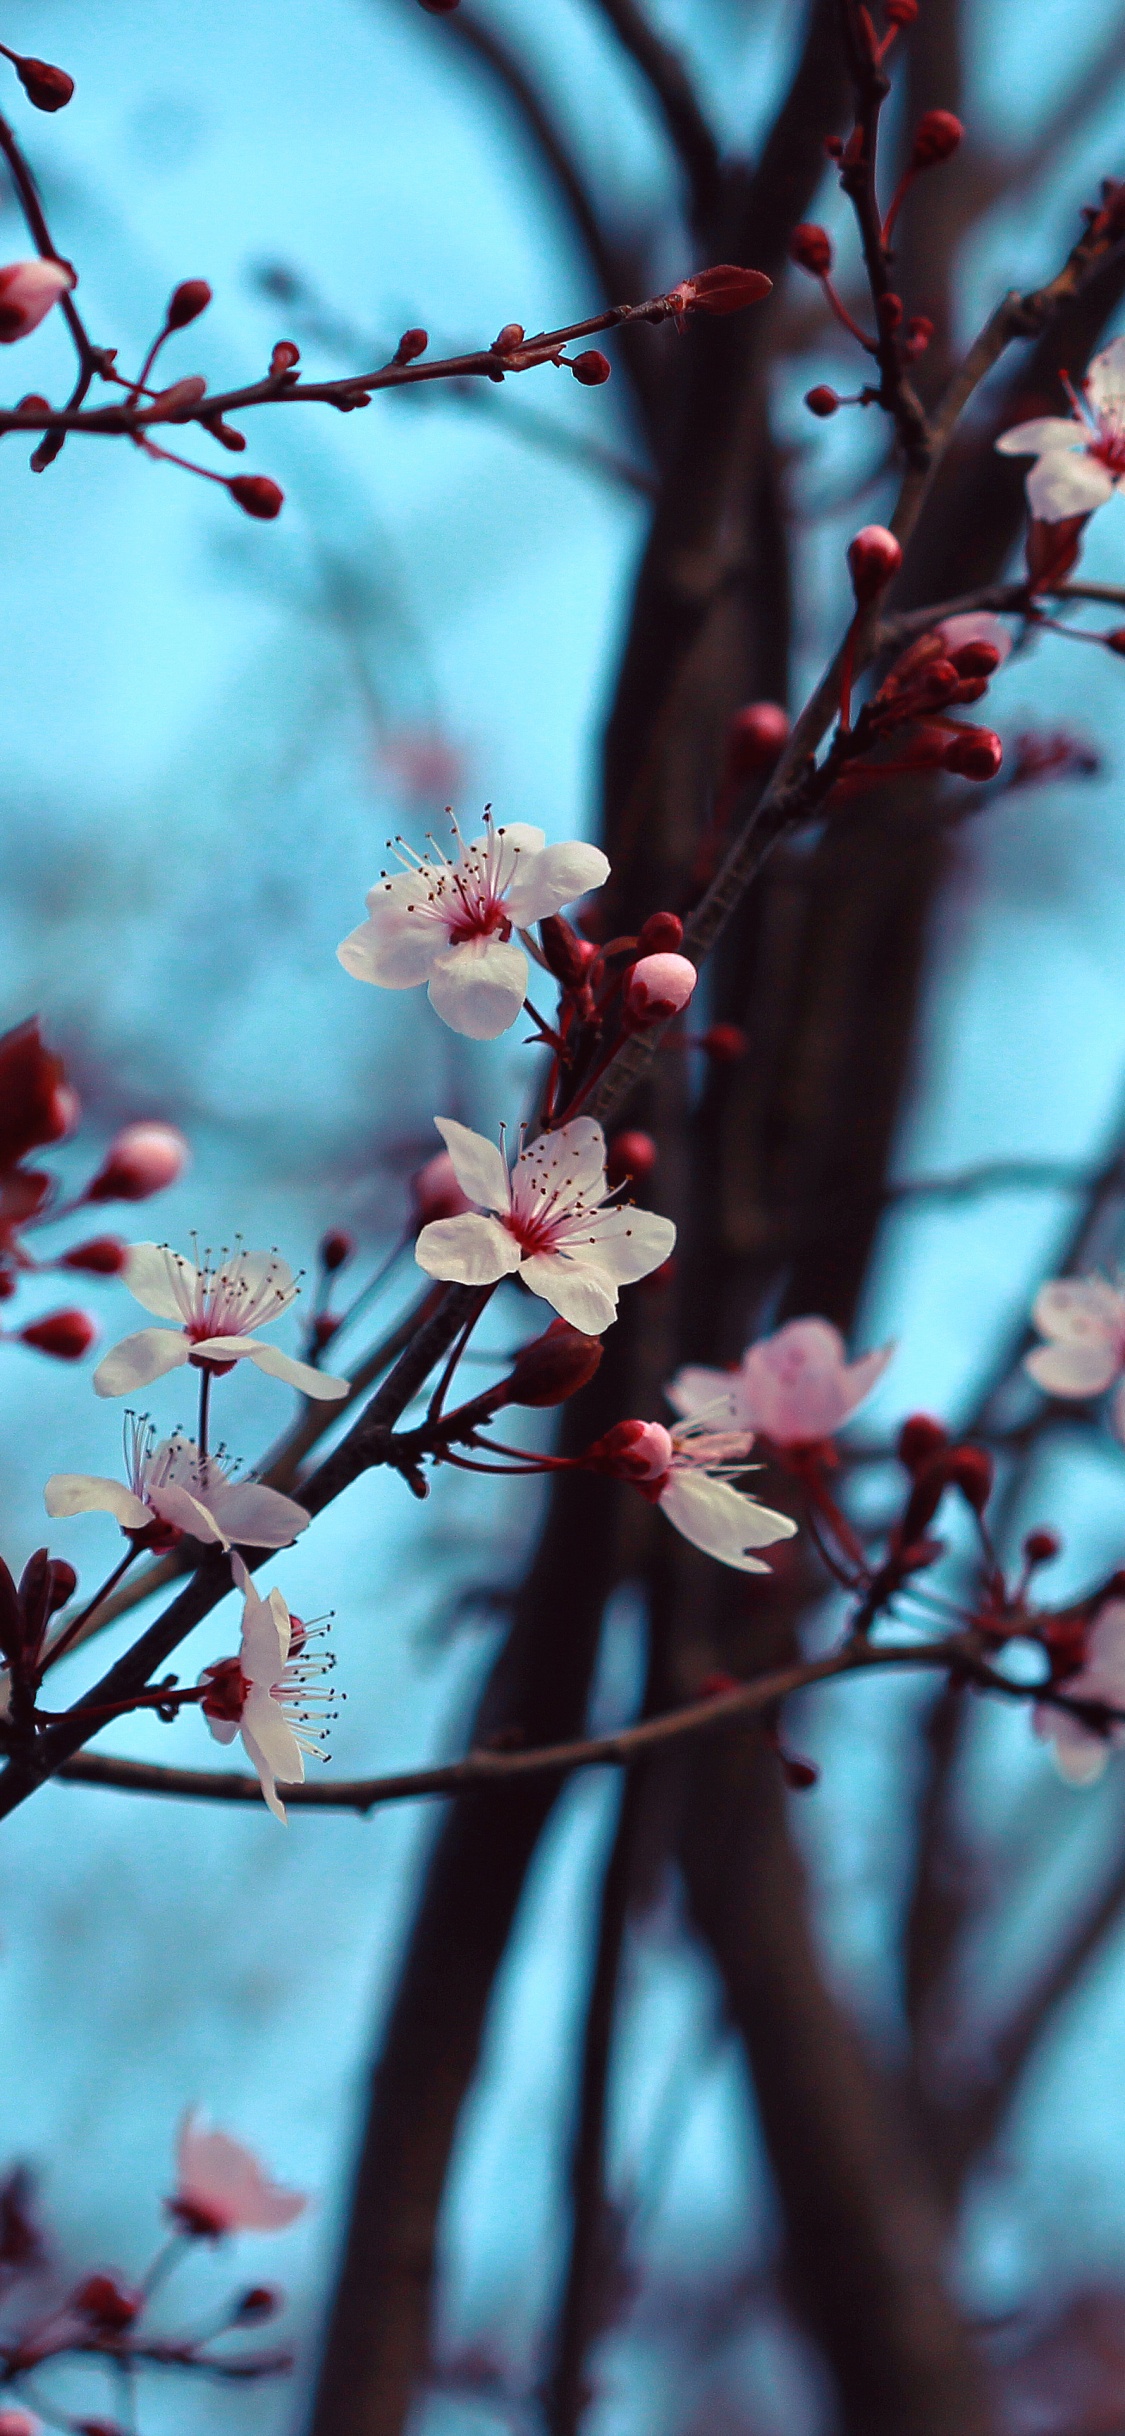 Pink Cherry Blossom in Close up Photography. Wallpaper in 1125x2436 Resolution